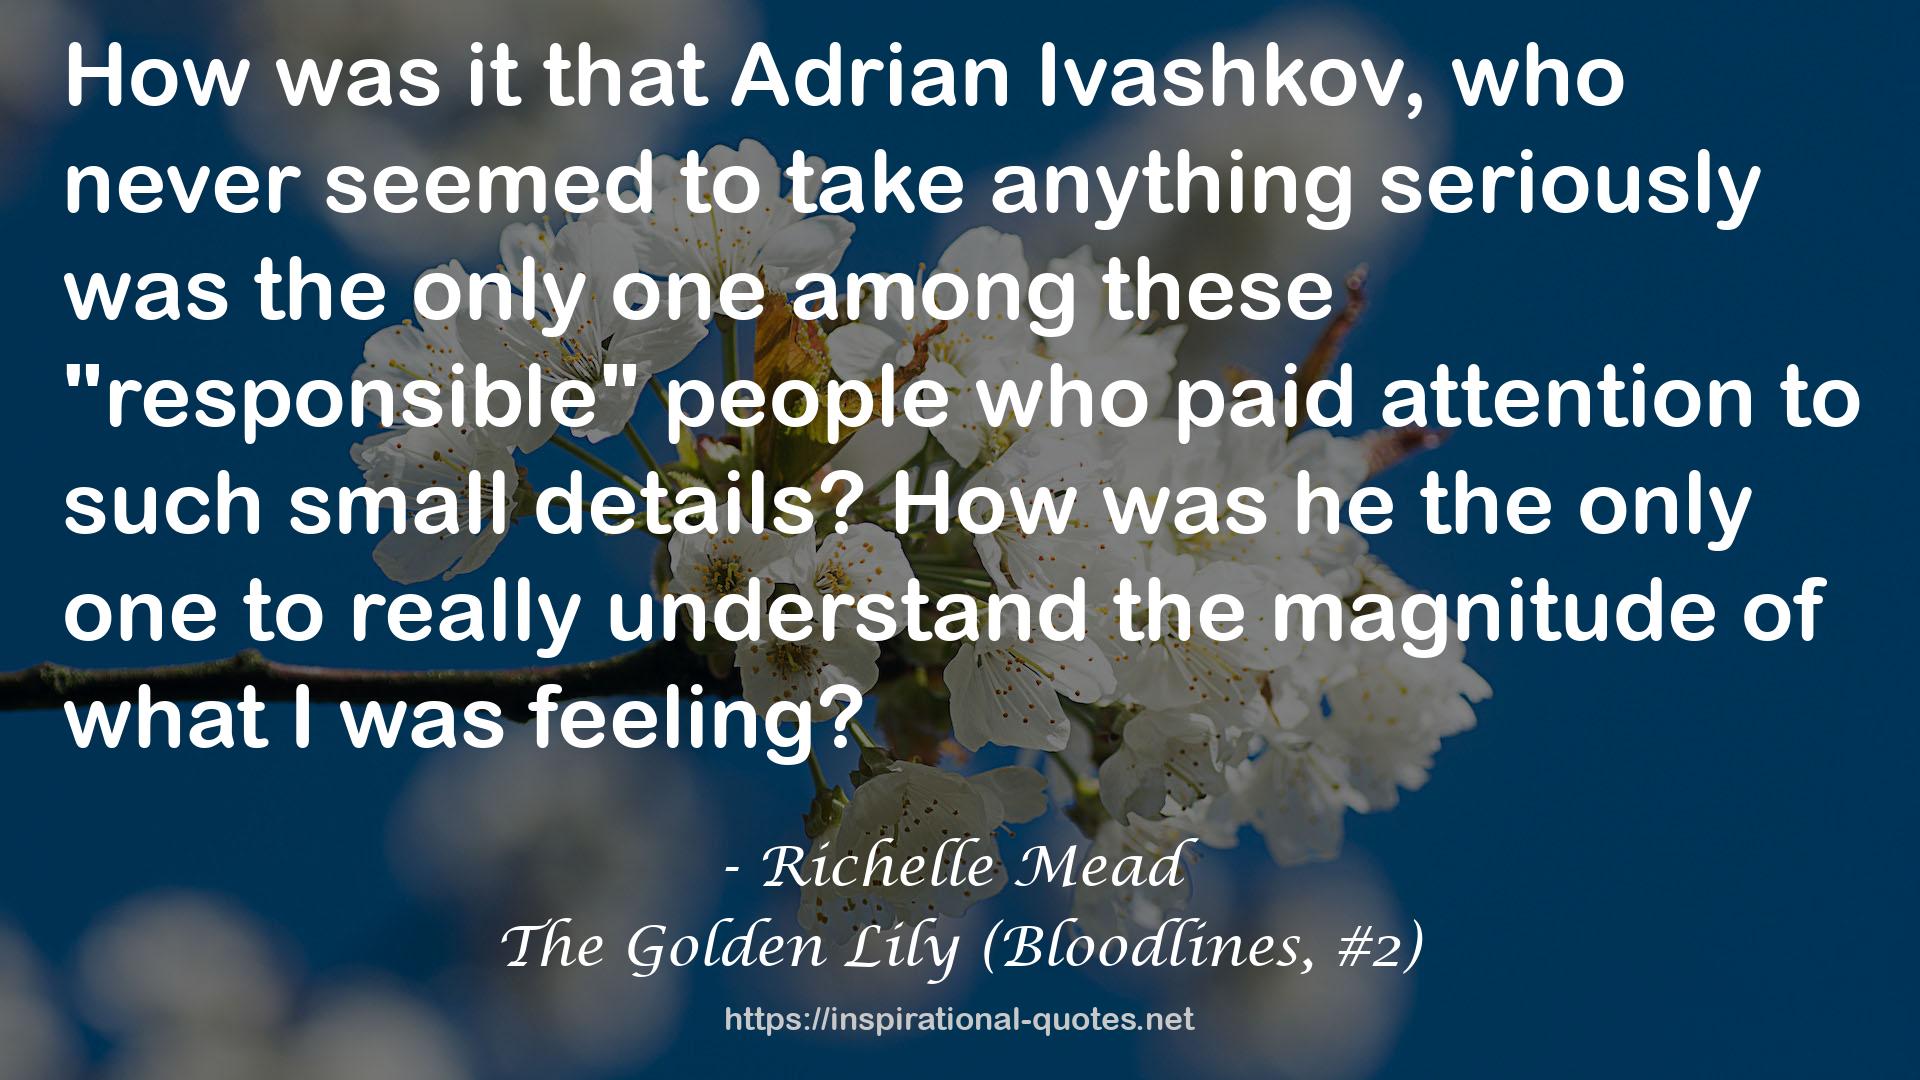 The Golden Lily (Bloodlines, #2) QUOTES